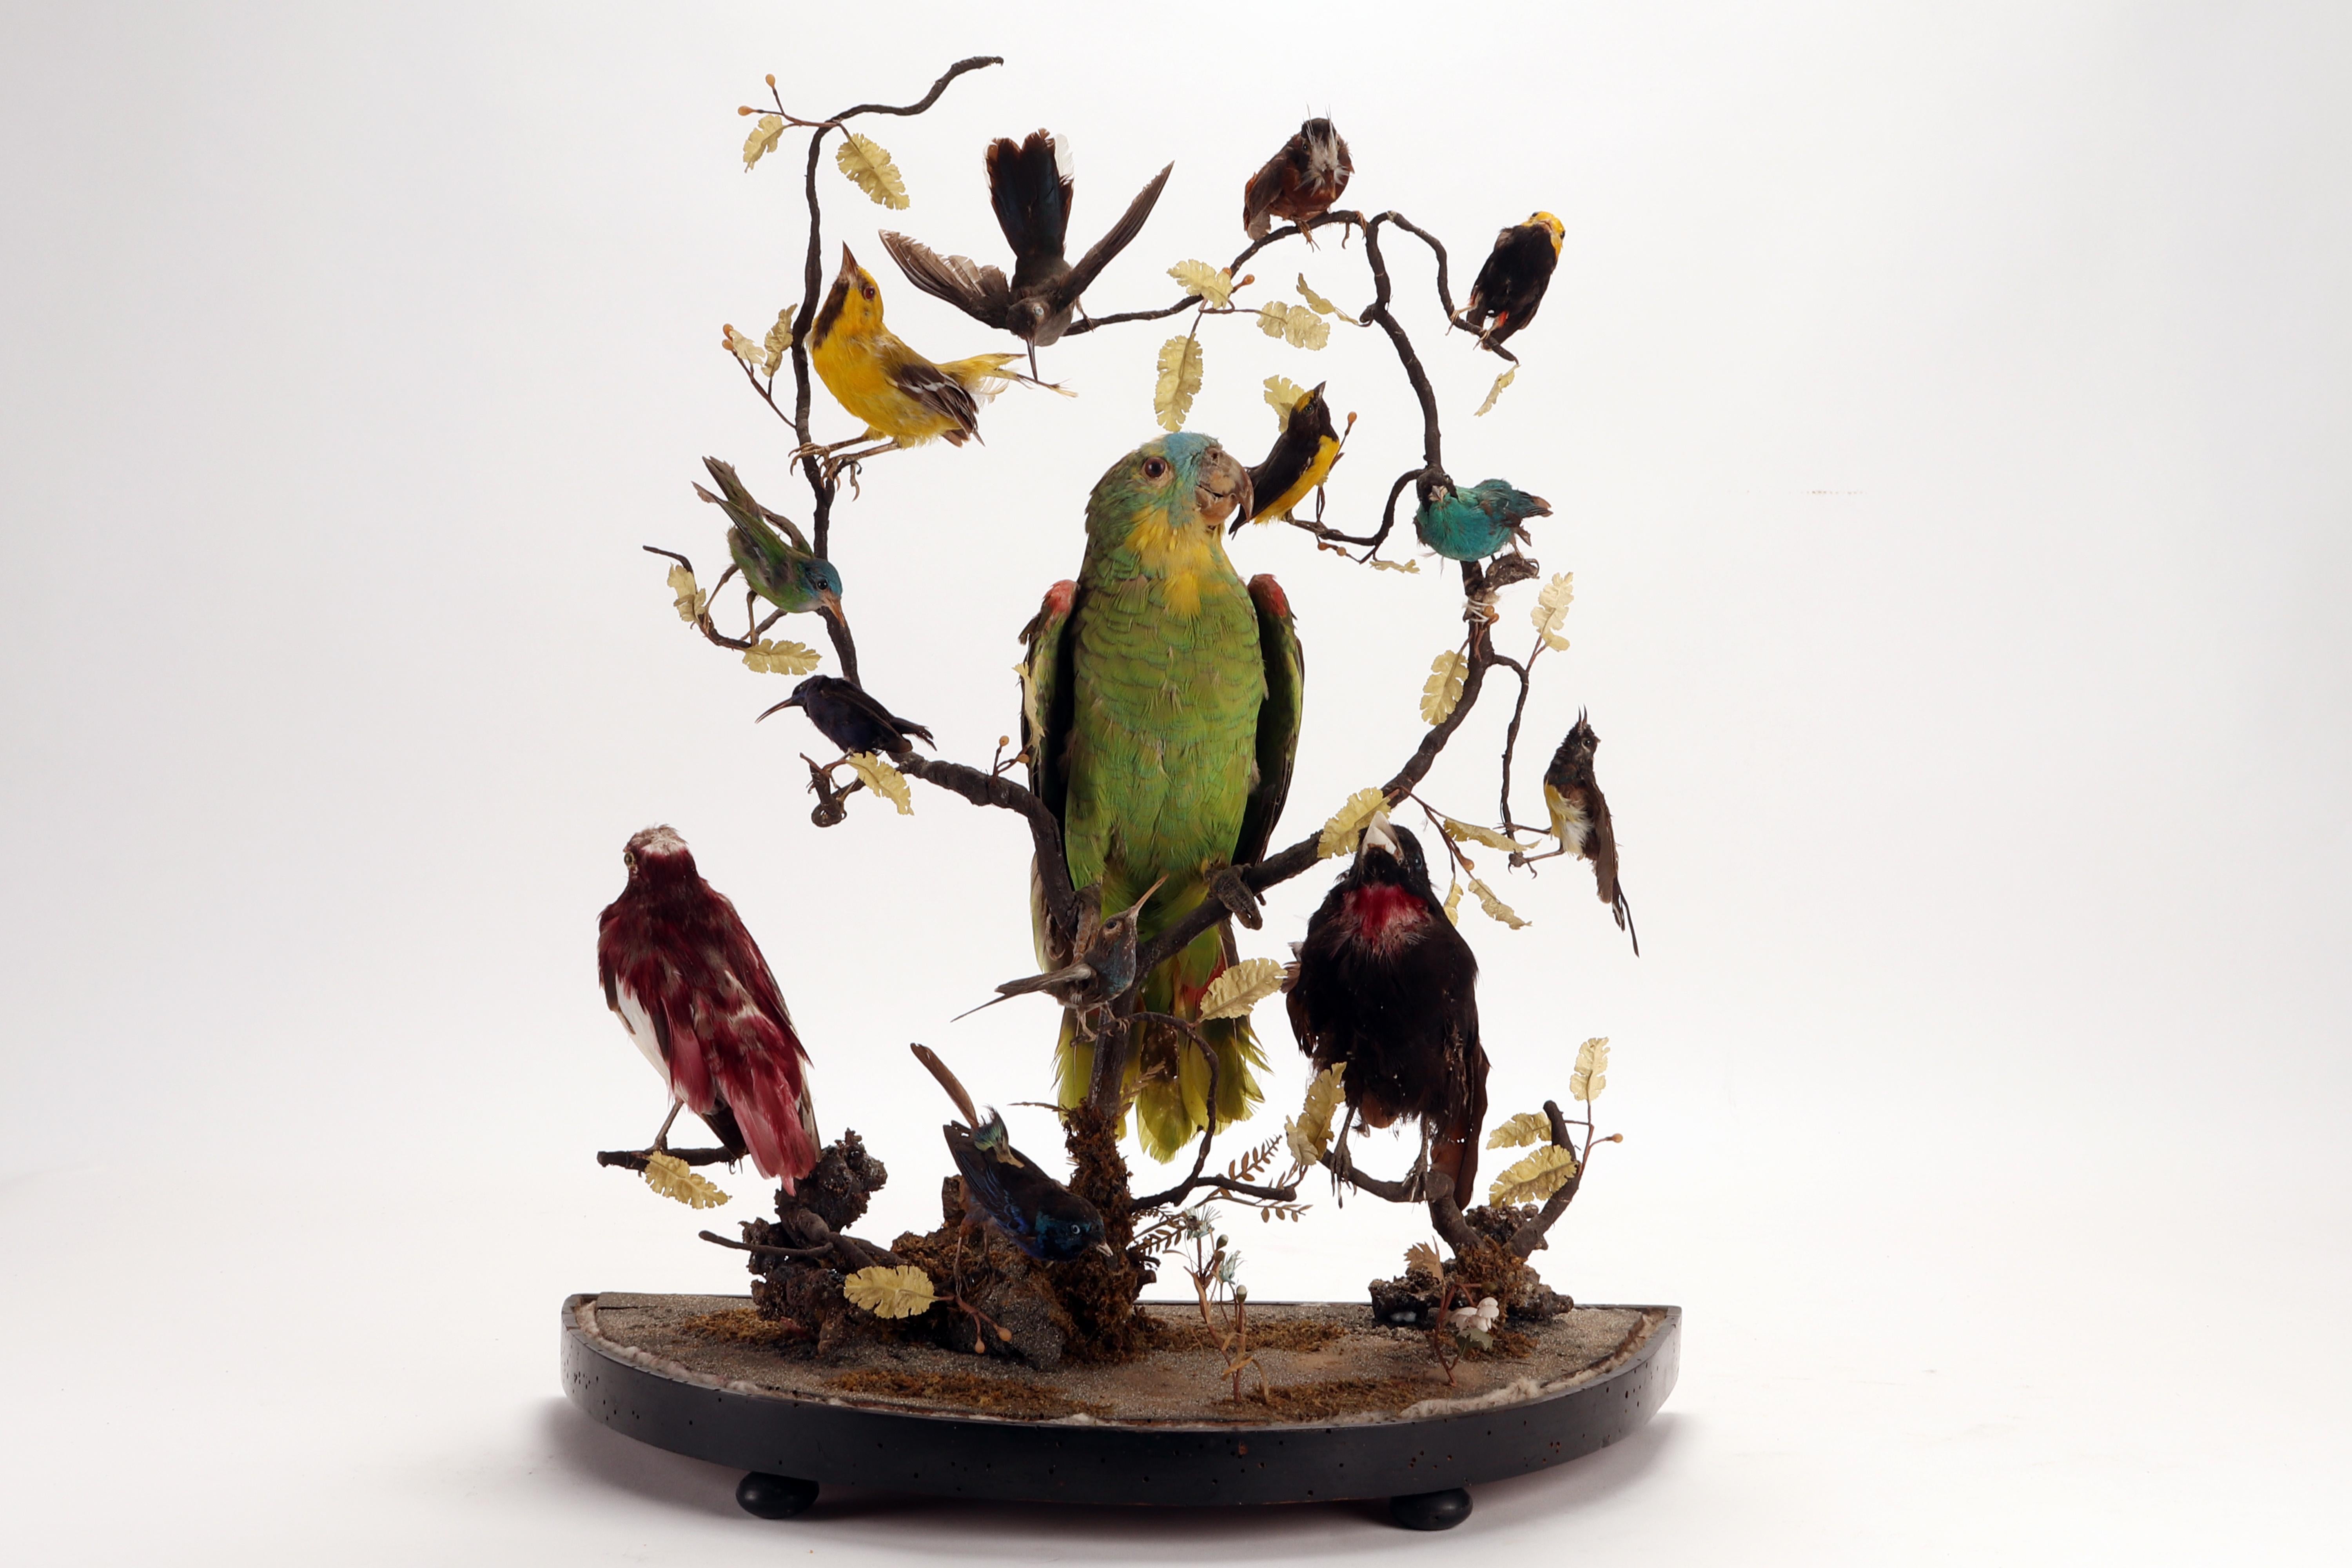 A Wunderkammer diorama with a central stuffed parrot, leaning against a branch, and 13 other different stuffed birds, also leaning against branches. The specimens, taxidermic birds, are mounted inside a curved glass case. Cooper & Sons S. Luke’s 28,